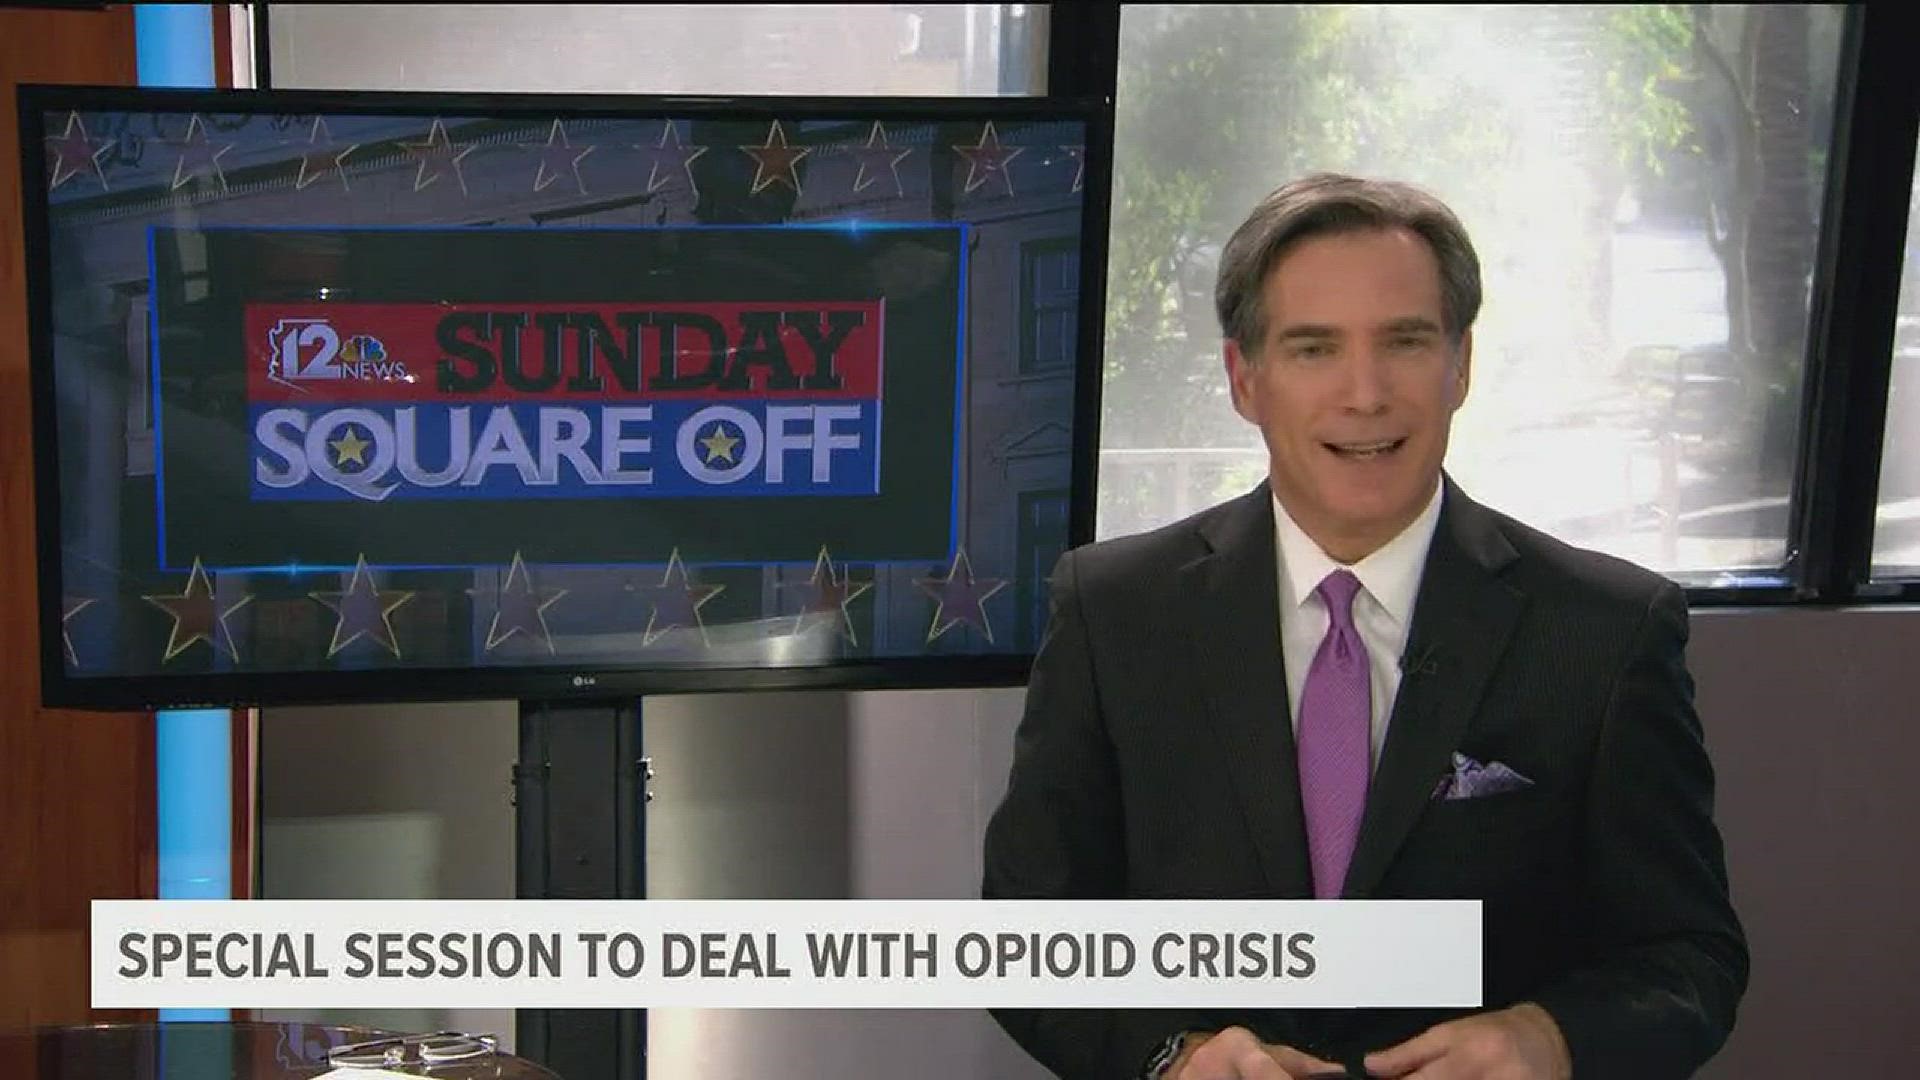 Dr. Cara Christ, Arizona's health services director, previews the Legislature's special session this week on dealing with the opioid crisis.